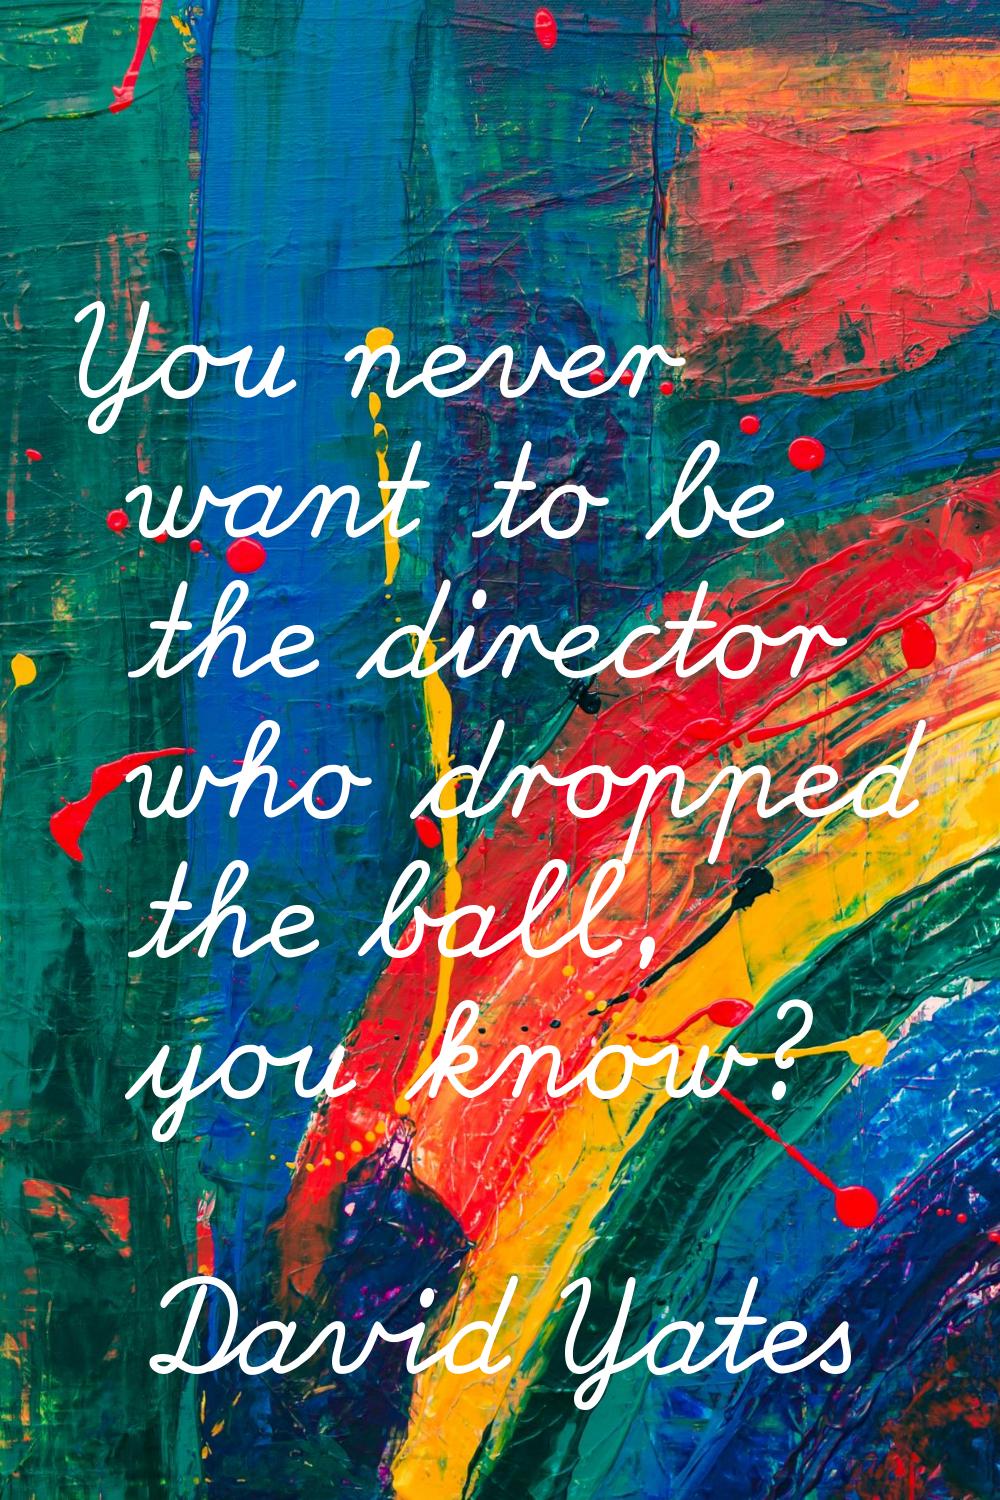 You never want to be the director who dropped the ball, you know?